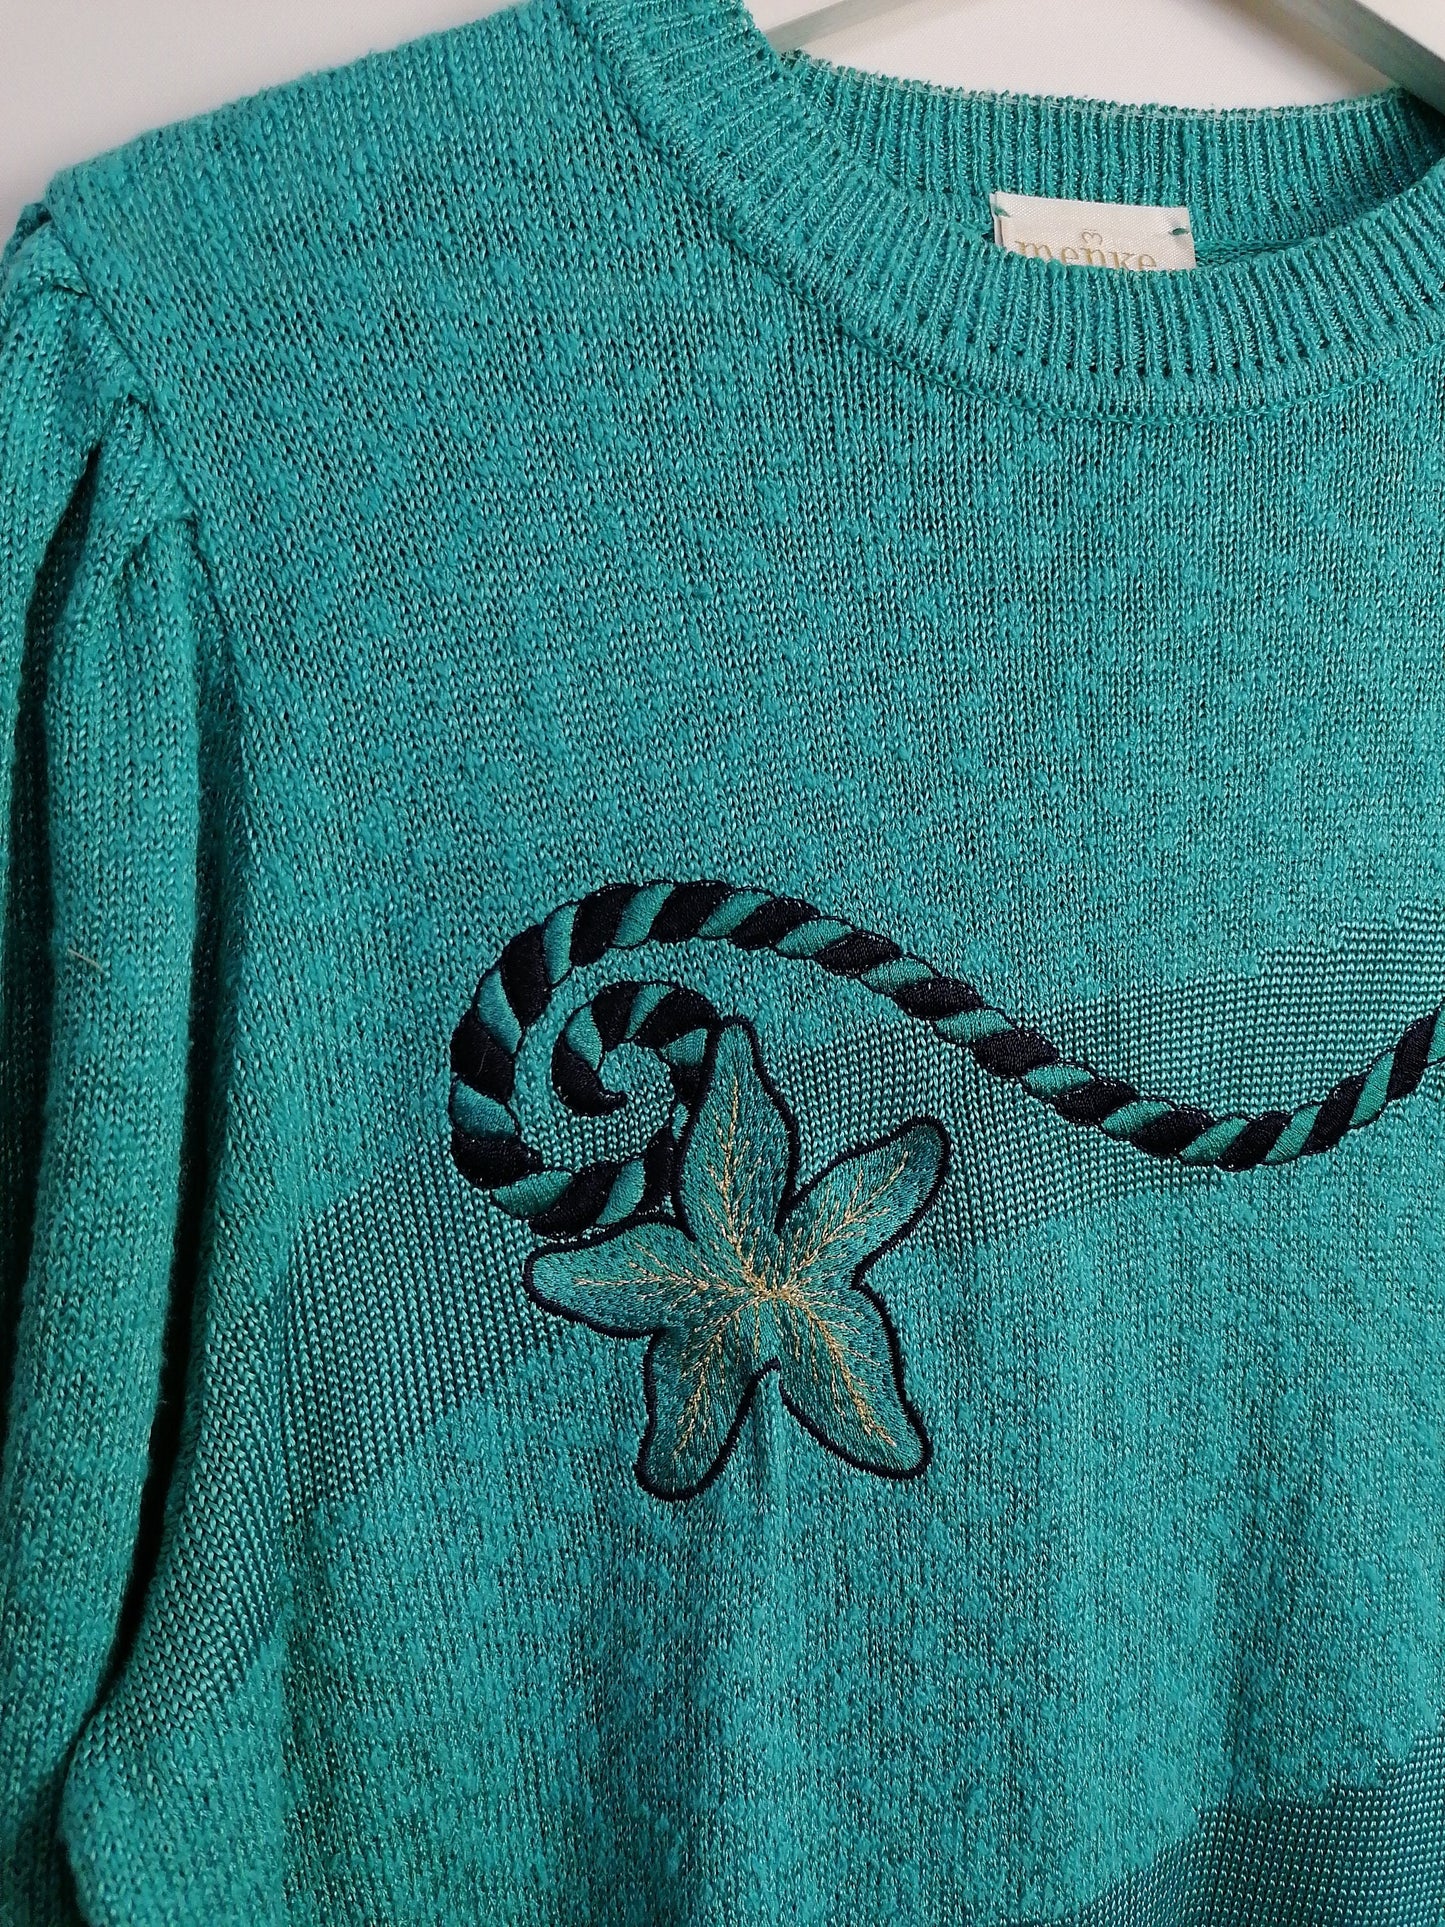 Vintage 80's Embroidery Knit Turquoise Retro Sweater